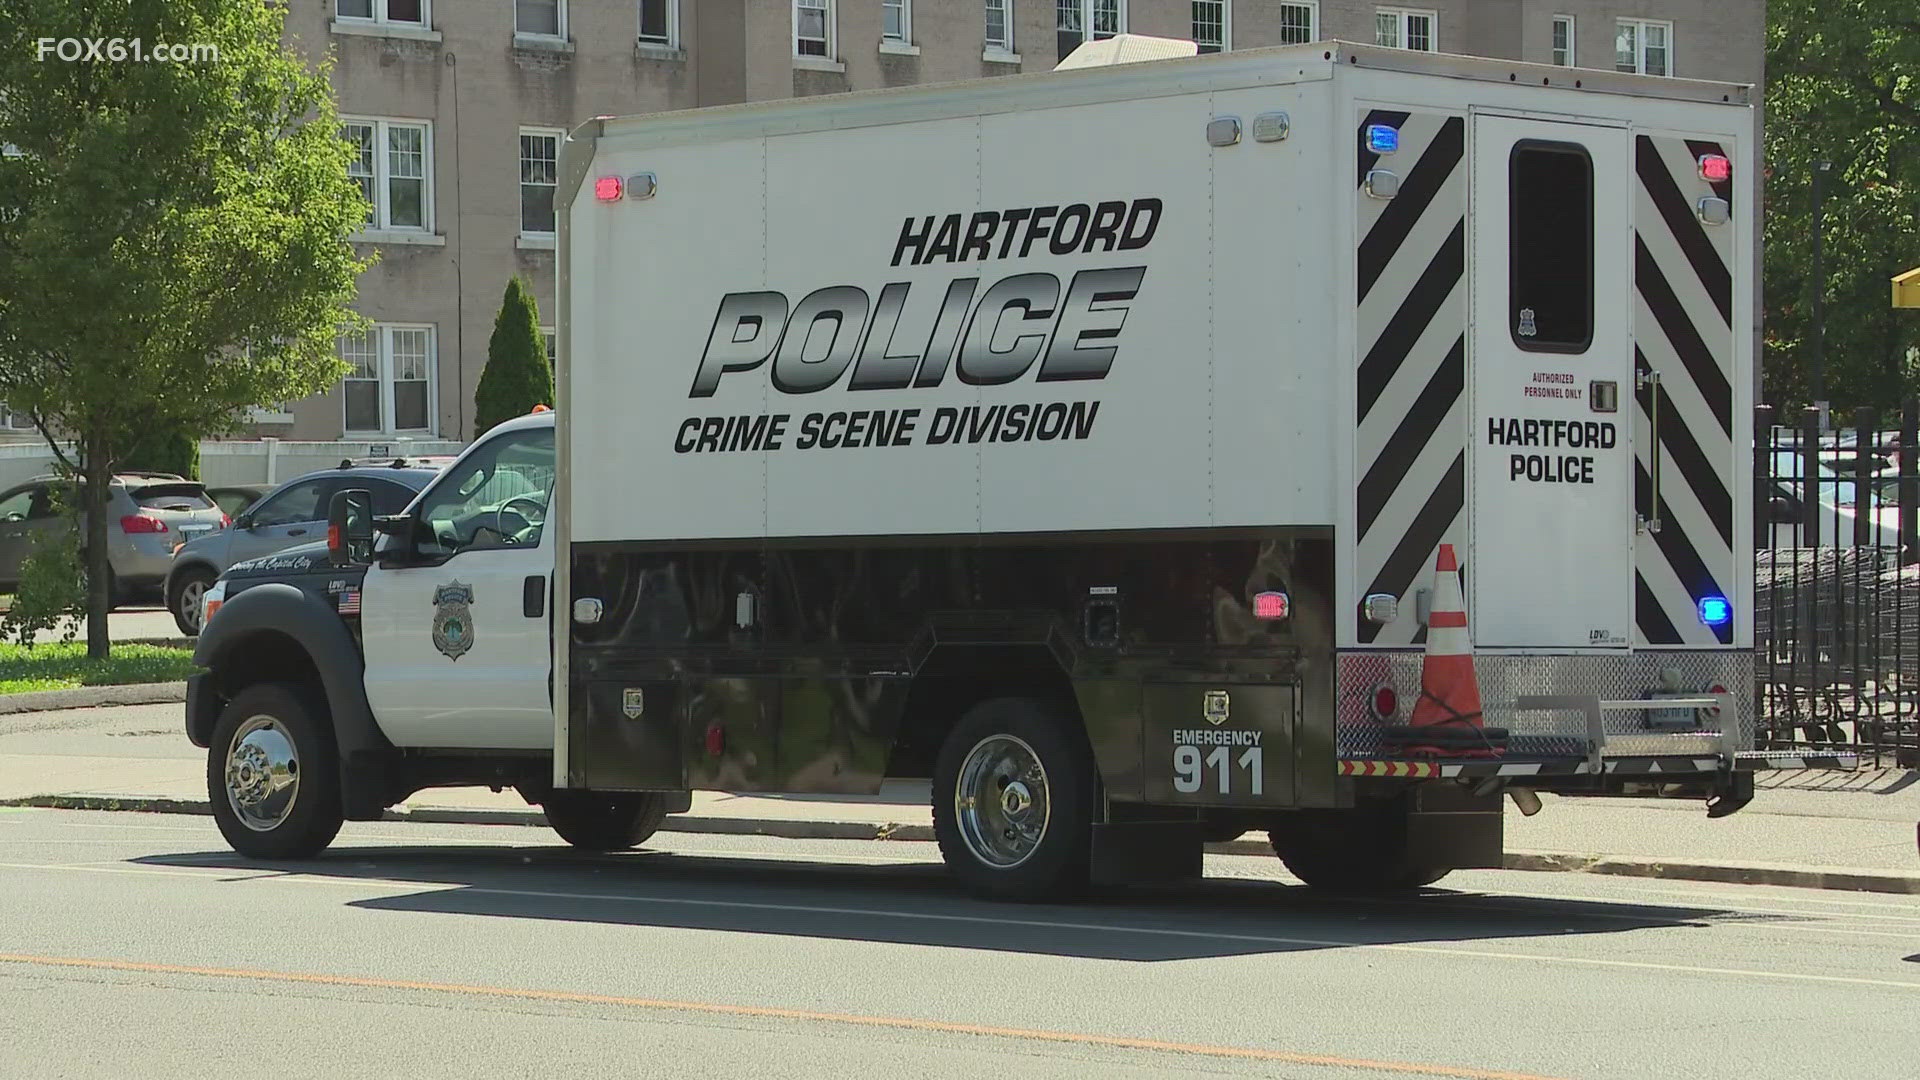 A body was found Friday morning in an apartment on Wethersfield Avenue. Police are treating it like a homicide, although the cause of death hasn't been determined.